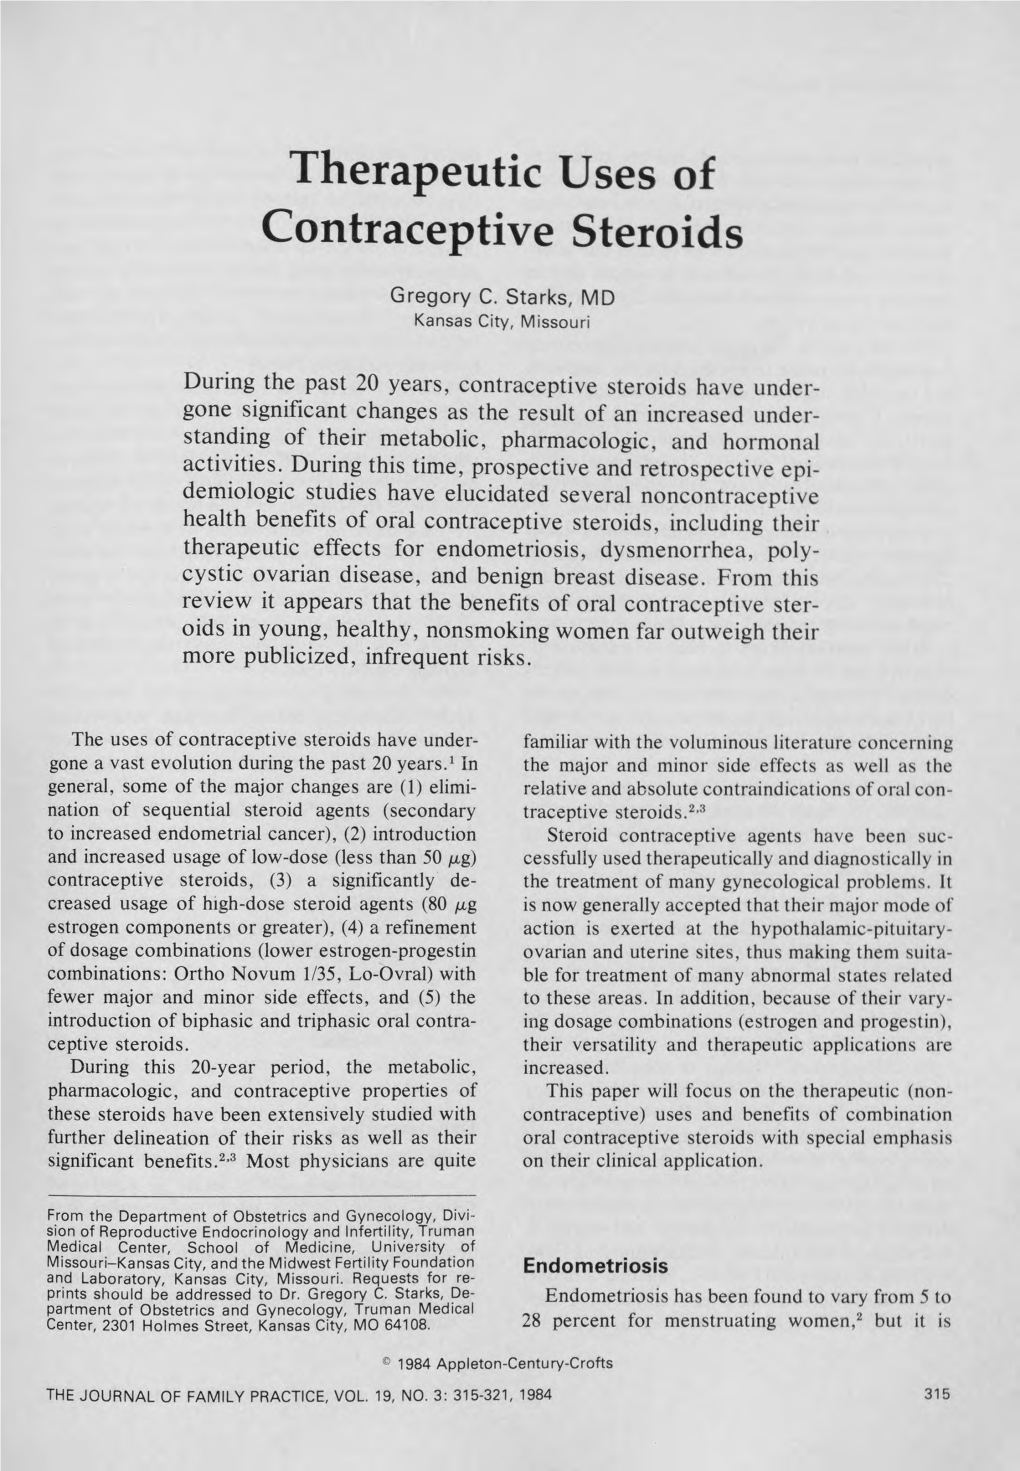 Therapeutic Uses of Contraceptive Steroids